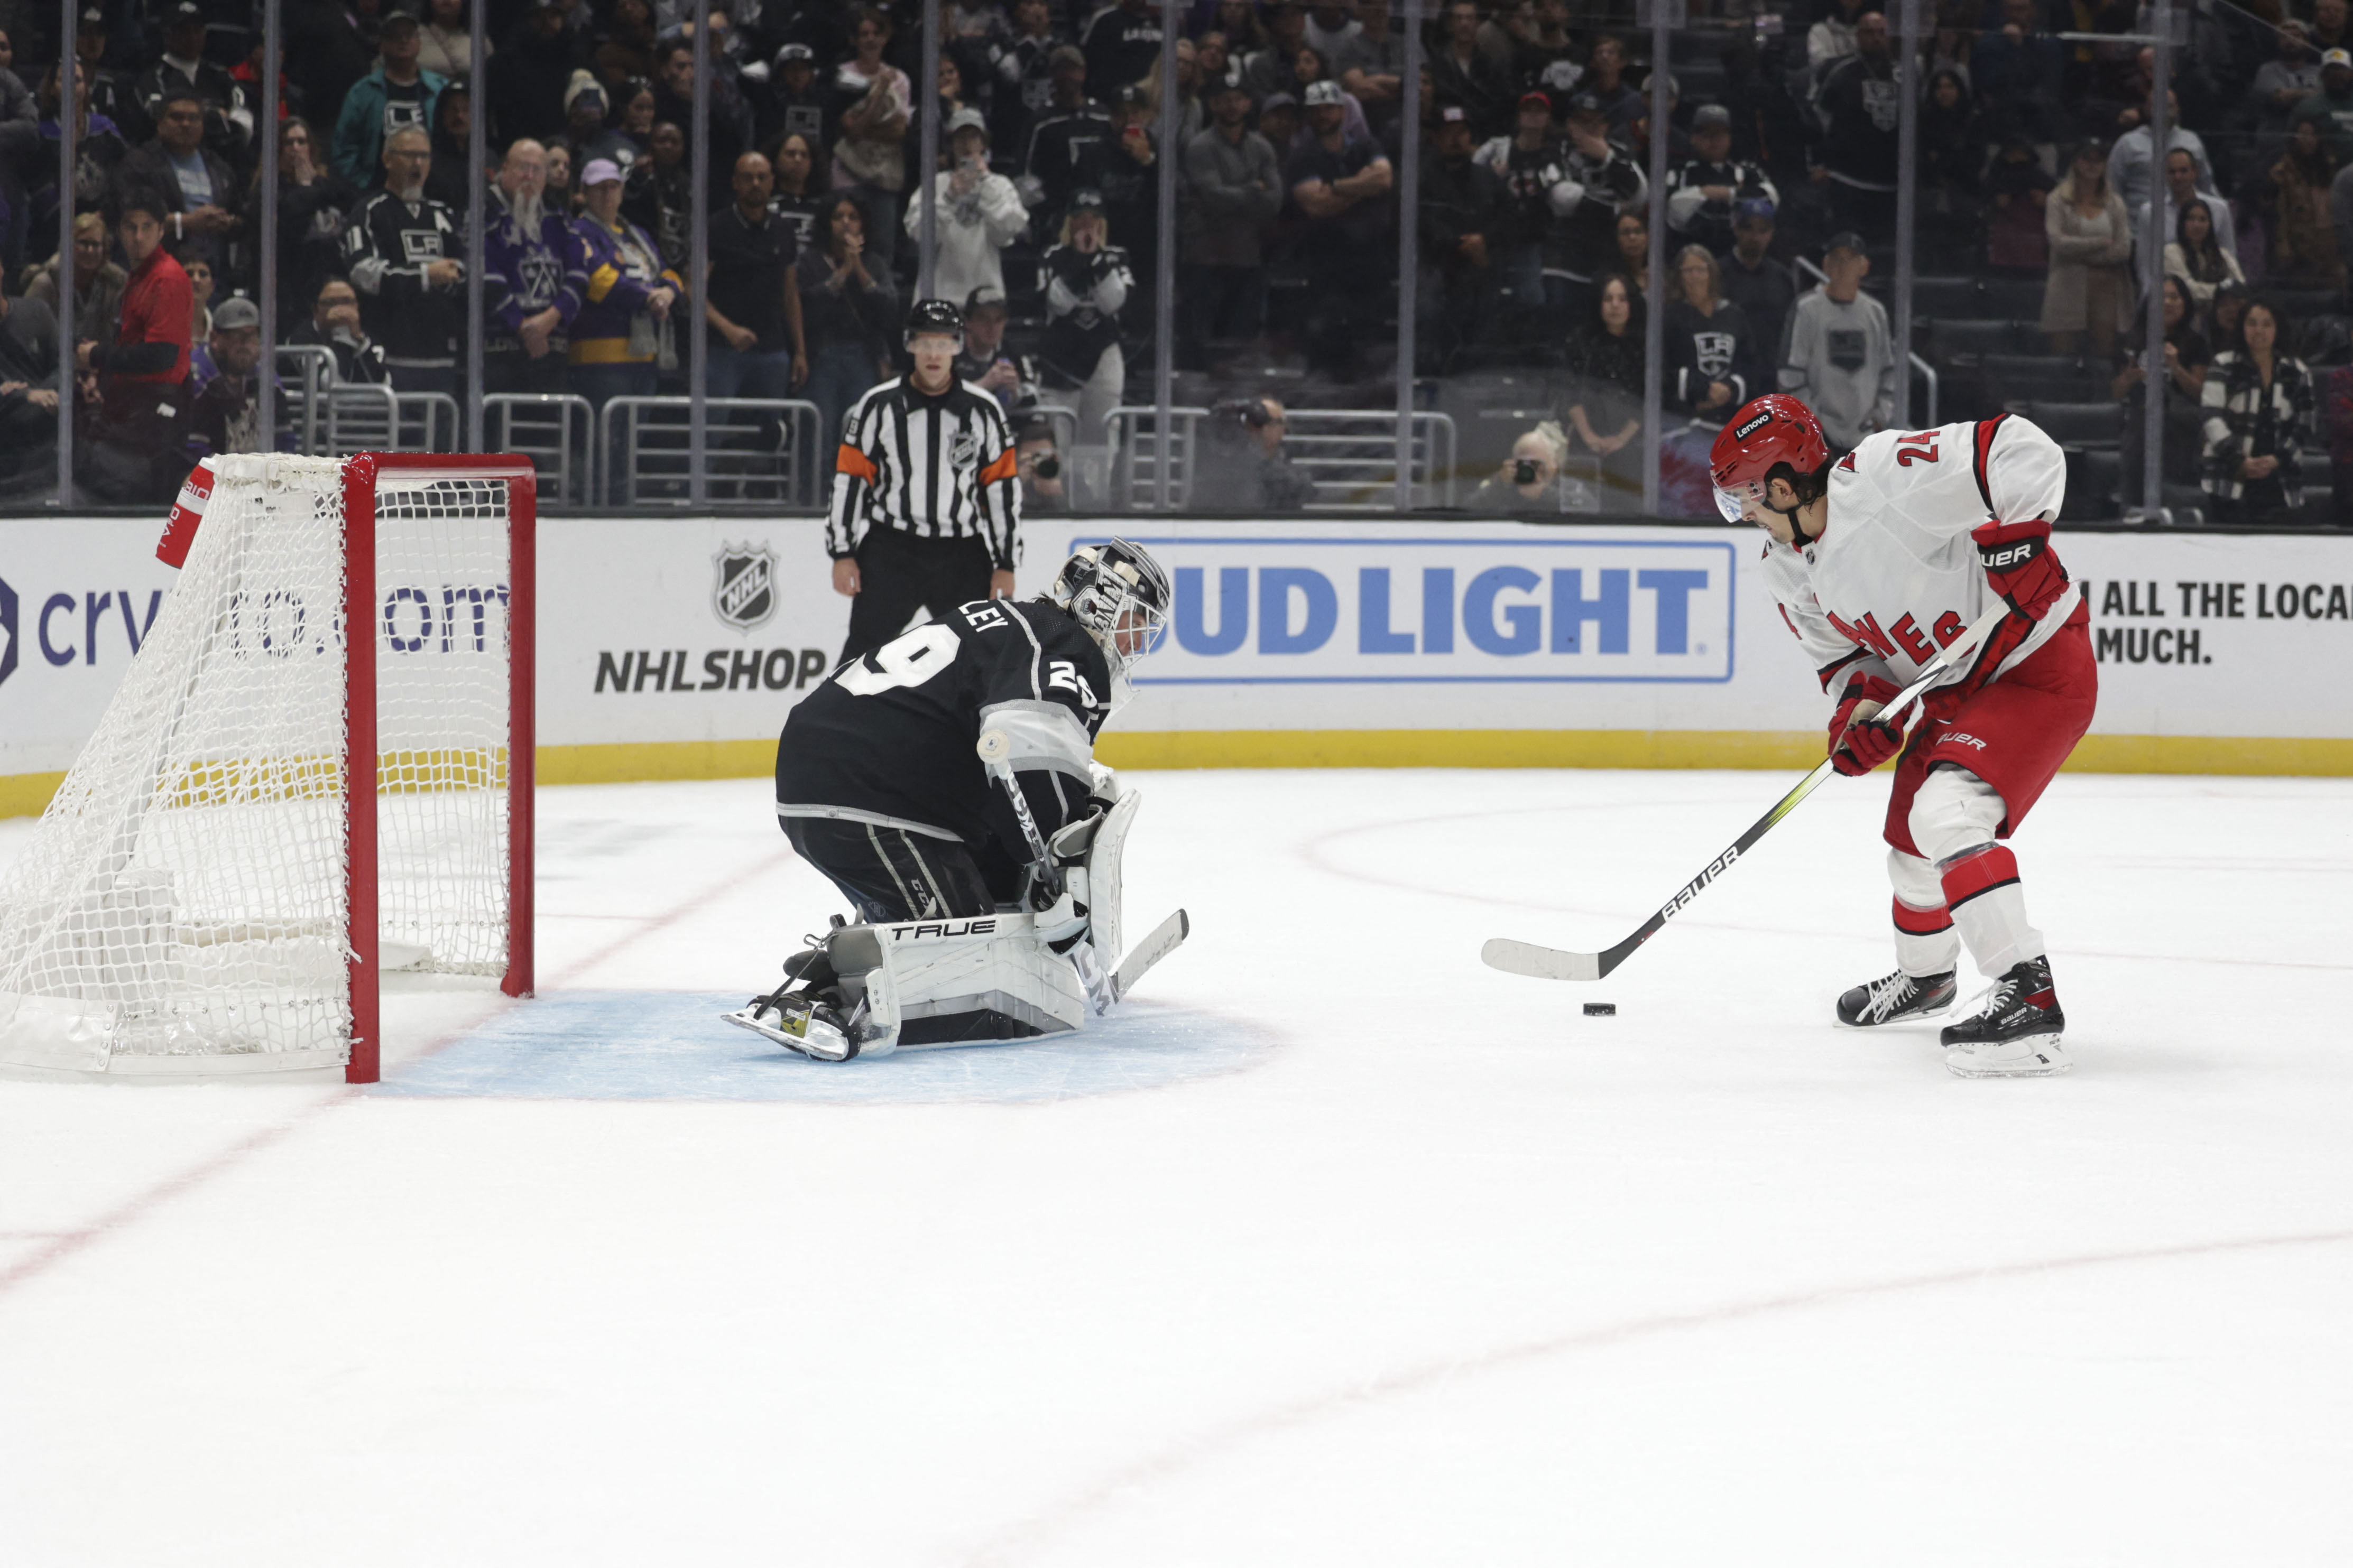 Hurricanes blow early lead, beat Kings in 9-round shootout - The